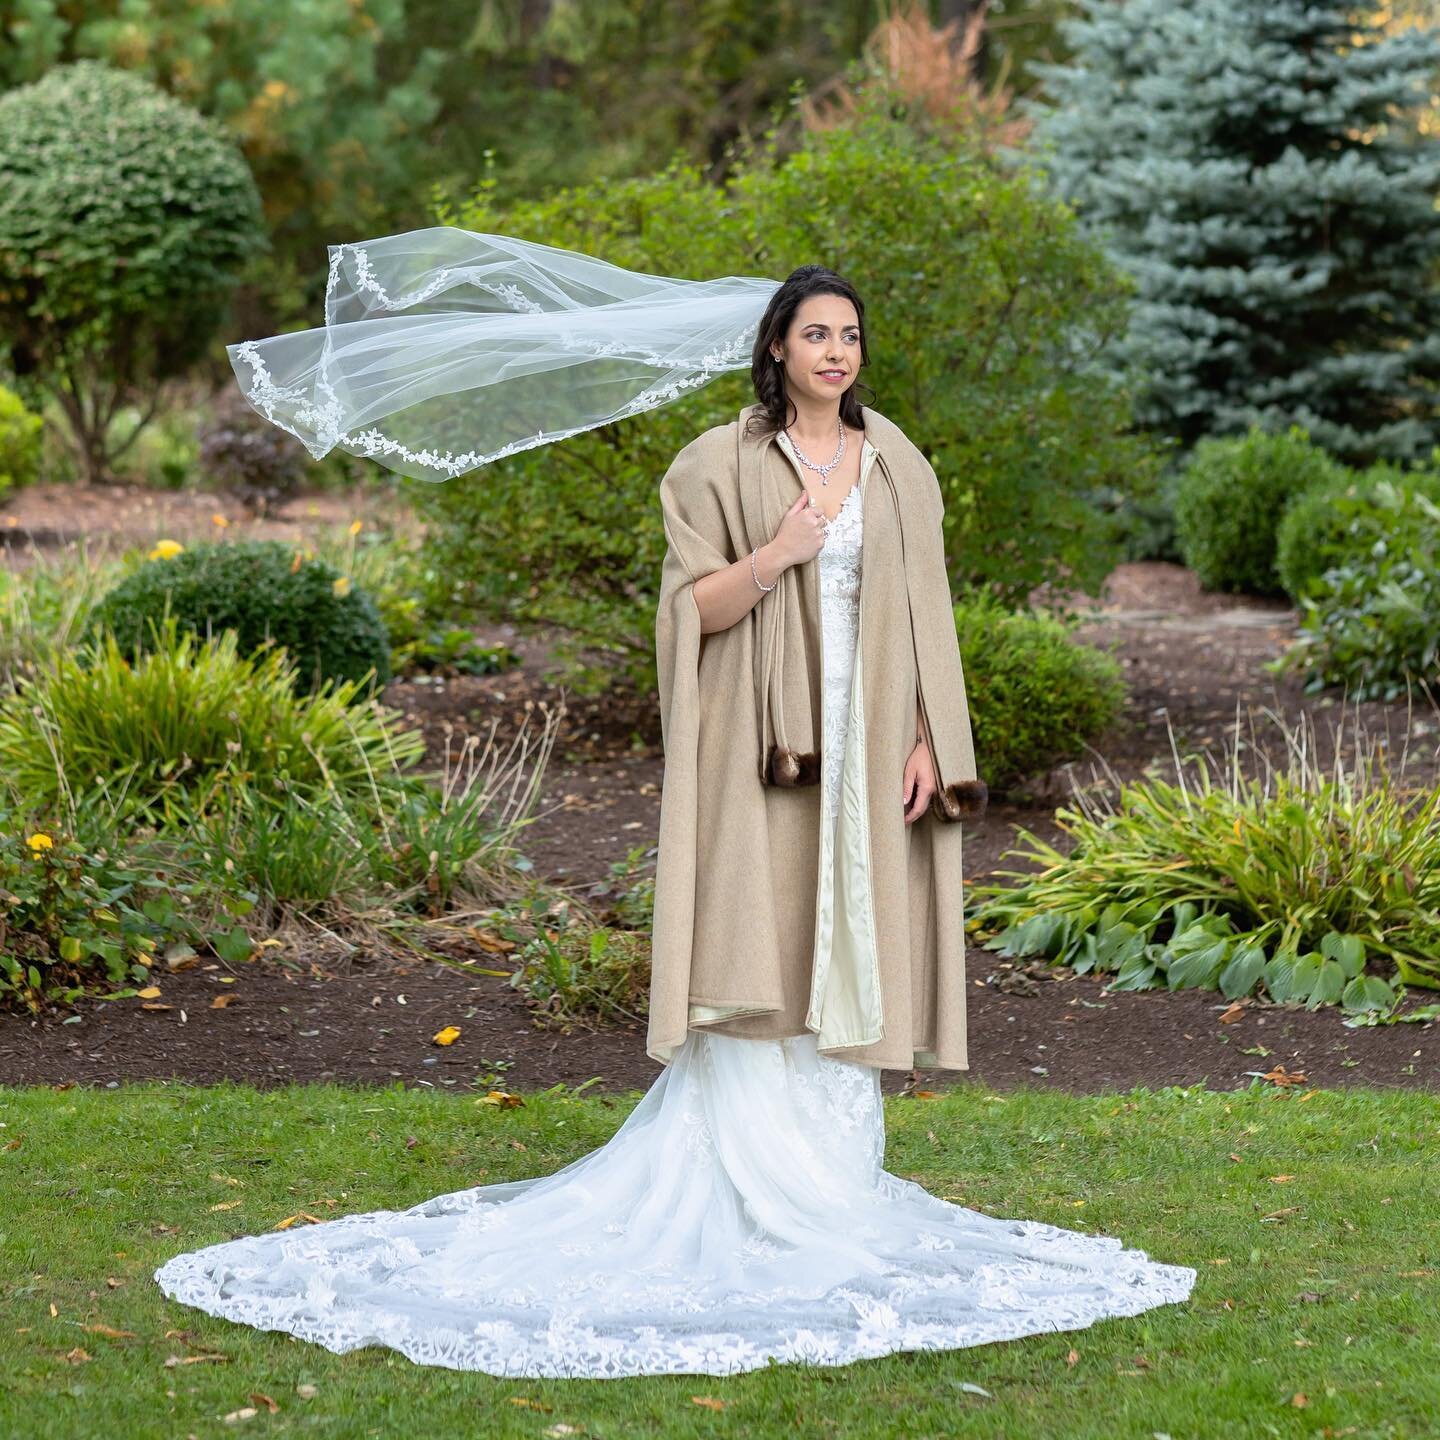 I absolutely love it when my clients incorporate a family heirloom and something special on their big day! Katie&rsquo;s cloak looks incredible on here and is perfect for a fall wedding! 😍

#wedding #wddingphotography #weddingwire #theknow #bride #b